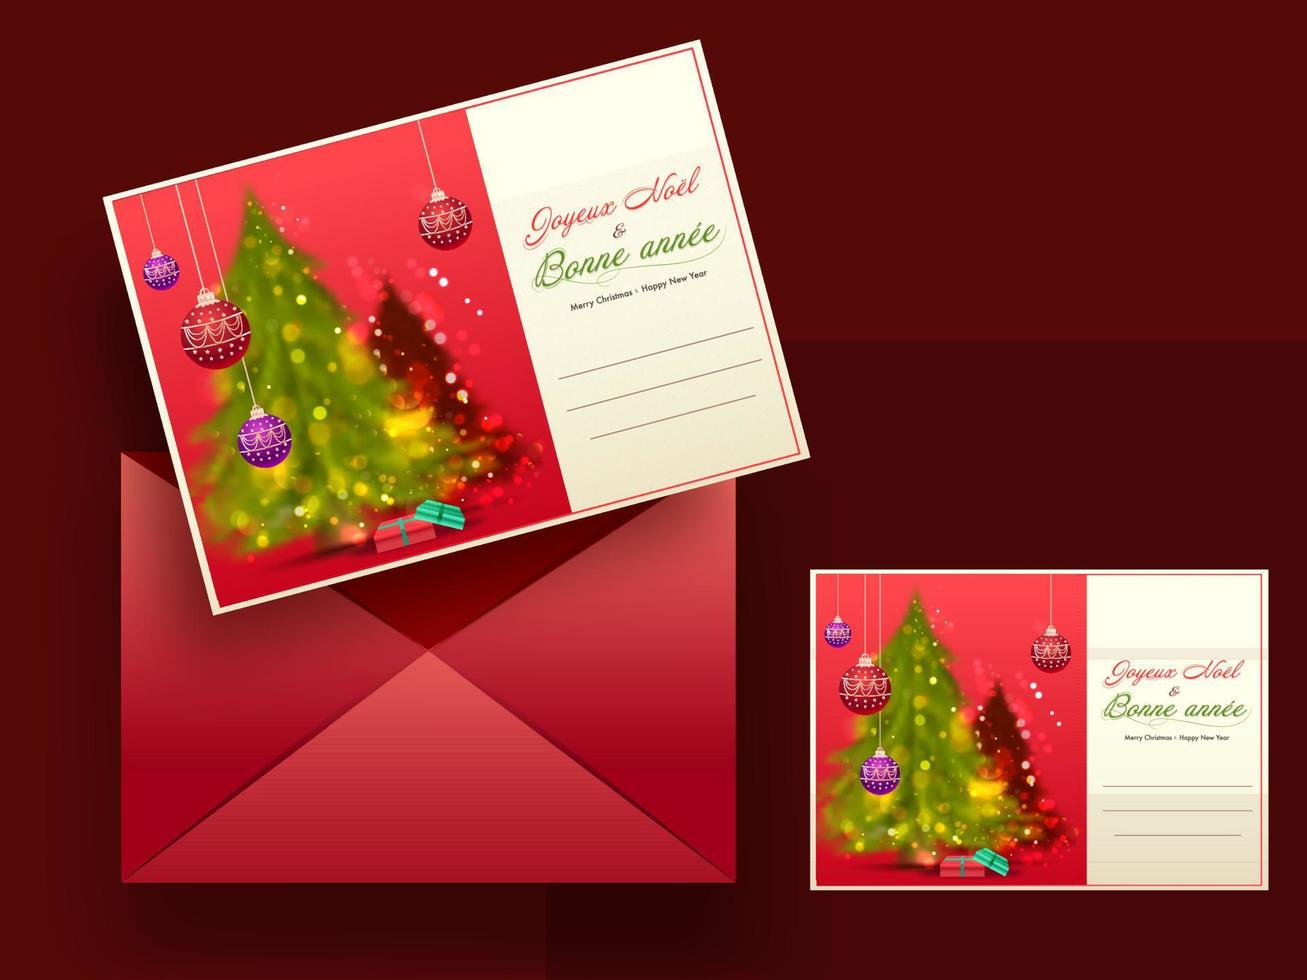 Merry Christmas Happy New Year Greeting Cards In French Language With Red Envelope. vector